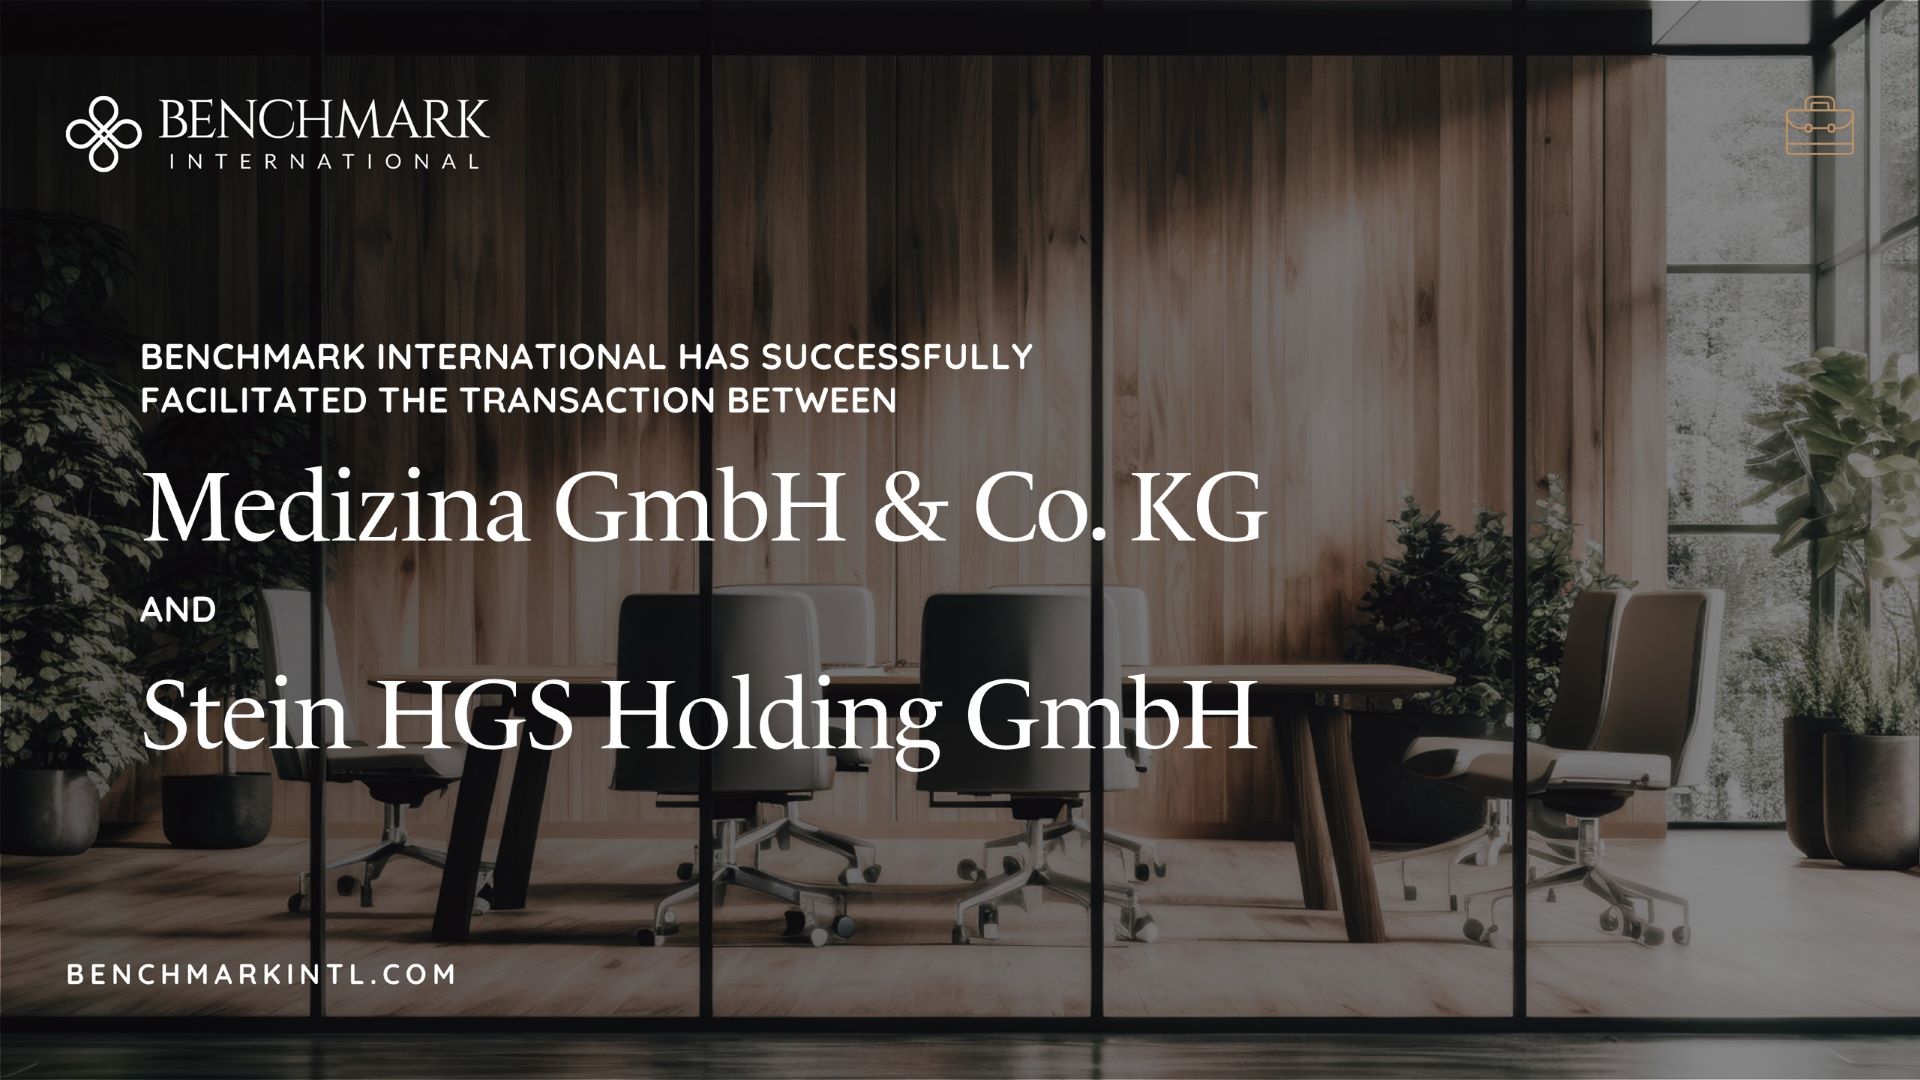 Benchmark International Successfully Facilitated the Transaction Between Medizina GmbH & Co. KG and Stein HGS Holding GmbH